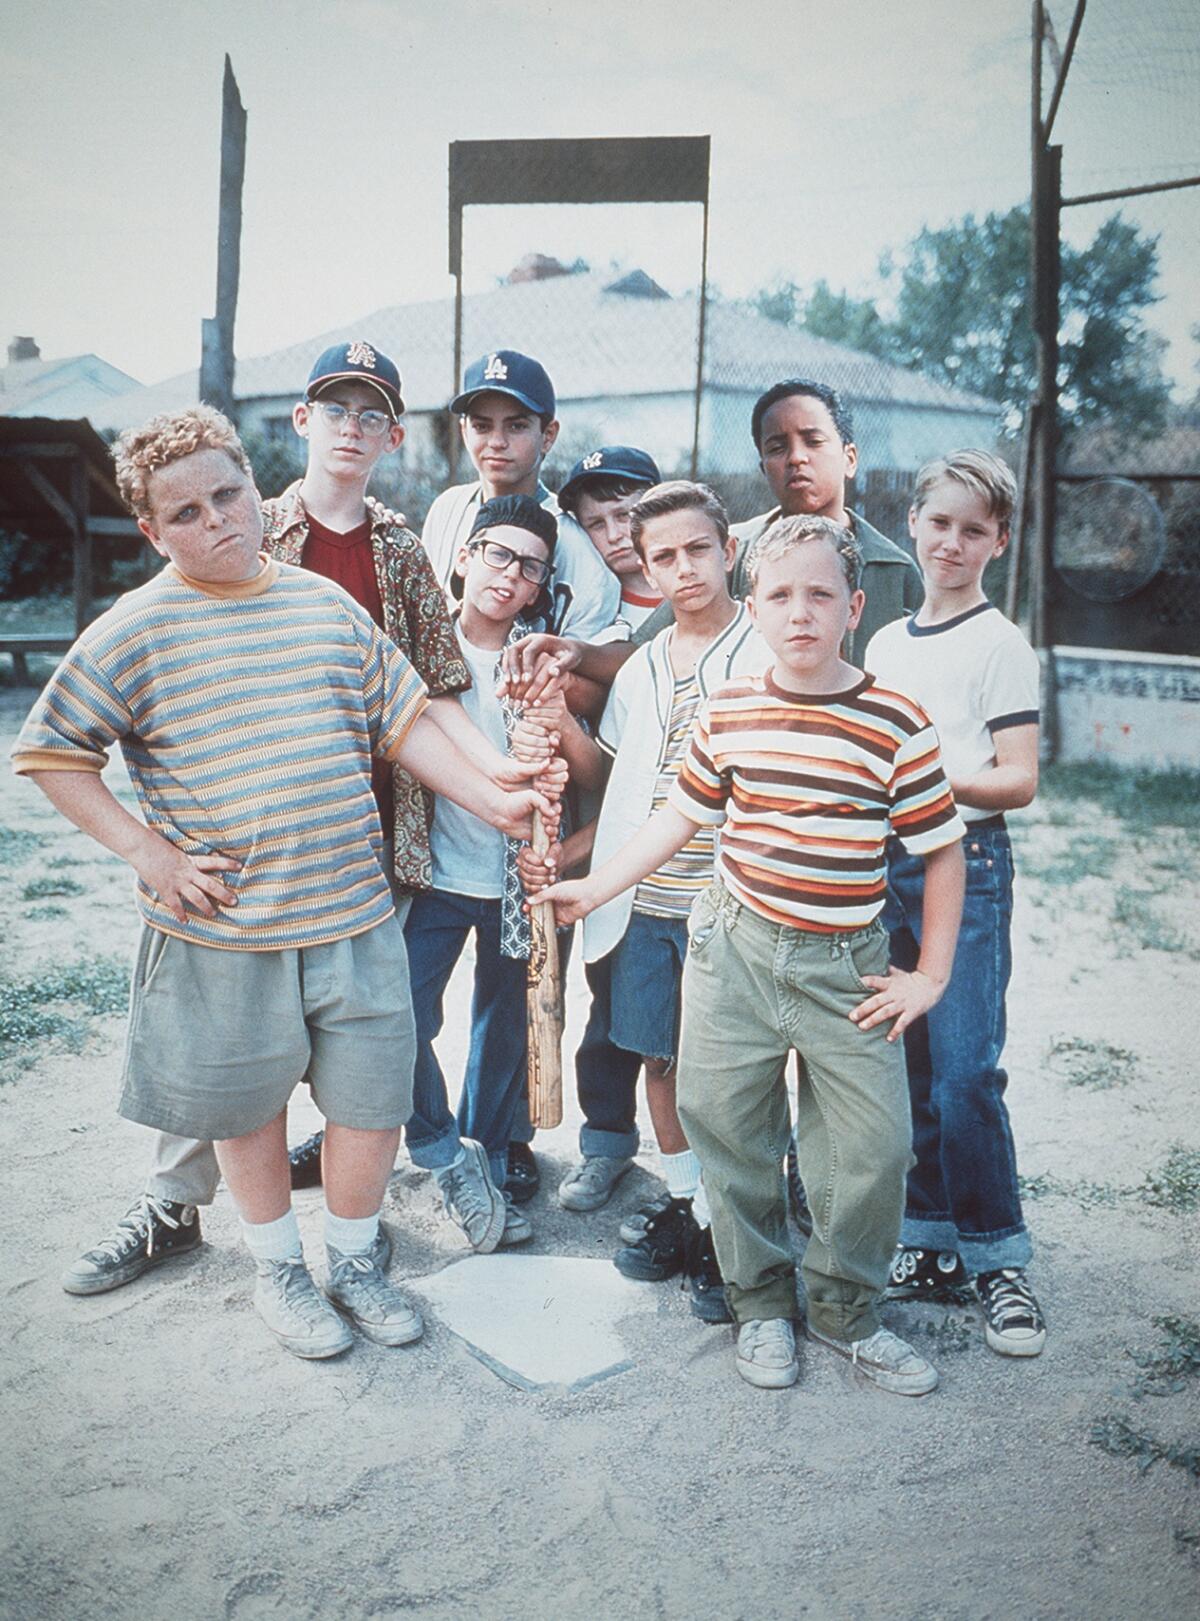 The comedy "The Sandlot." (Left to right) Patrick Renna is "Ham," Grant Gelt is Bertram, Mike Vitar is Benny, 